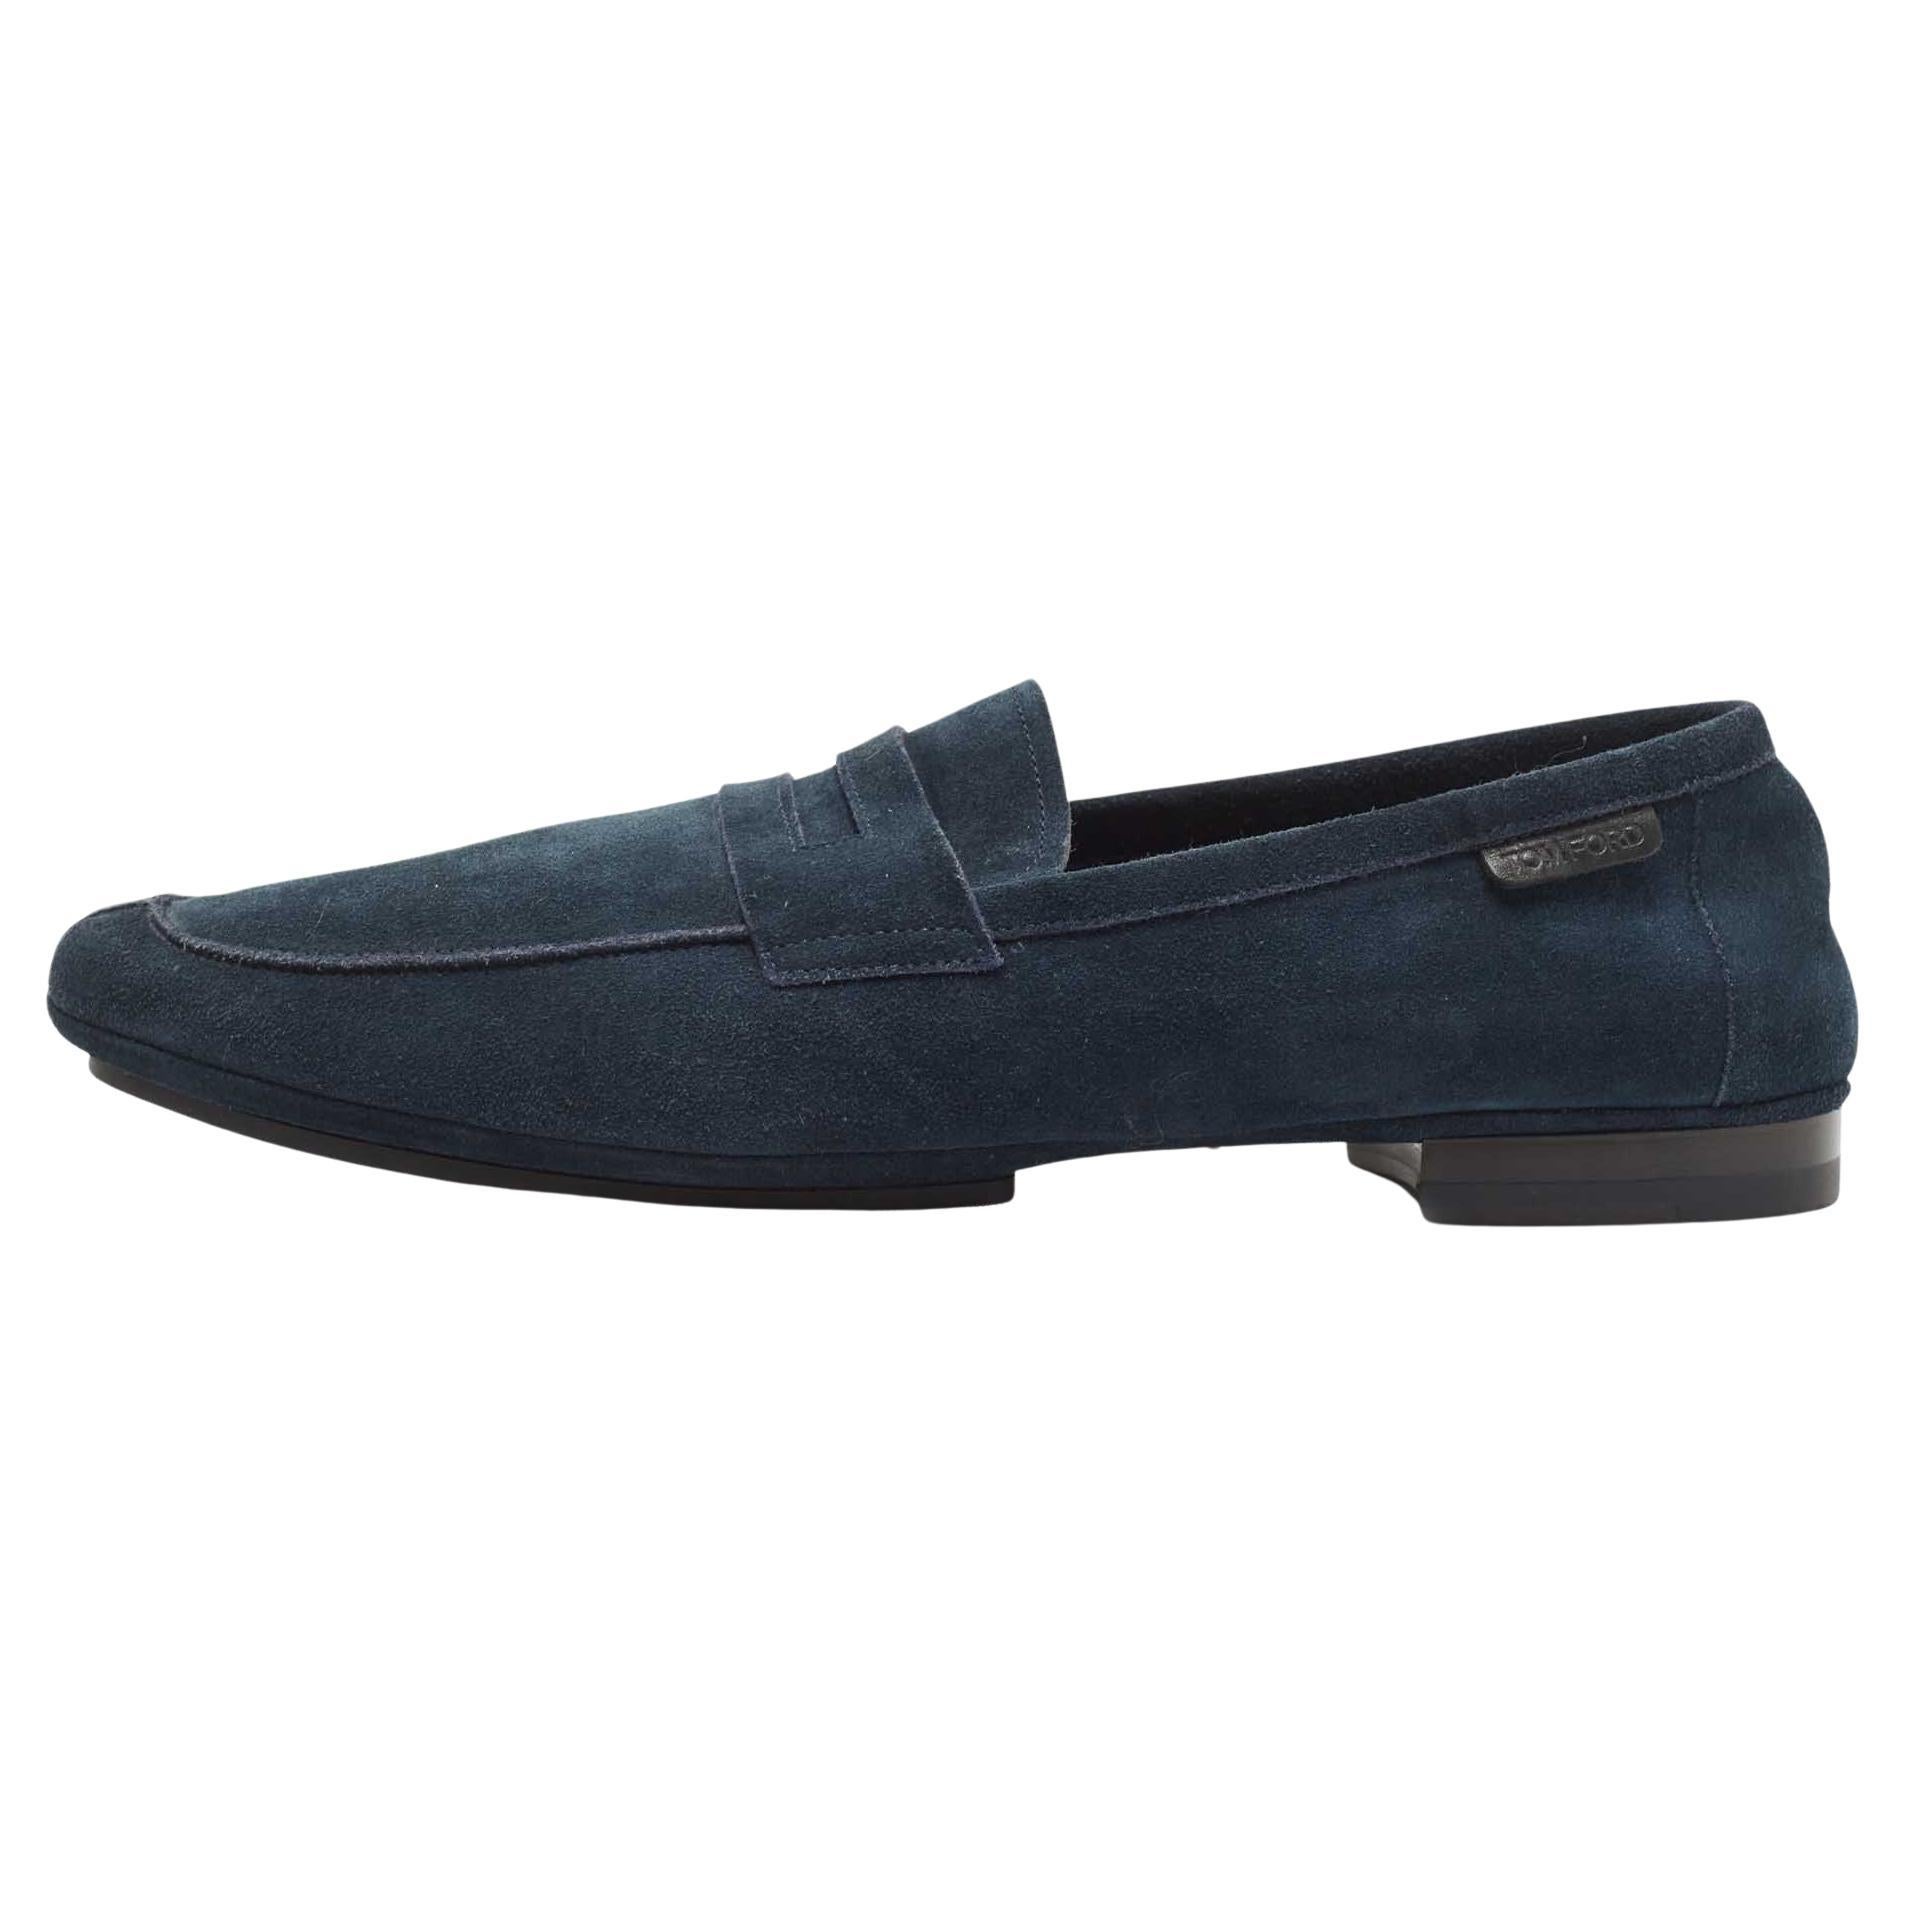 Tom Ford Dark Blue Suede Berwick Loafers Size 43